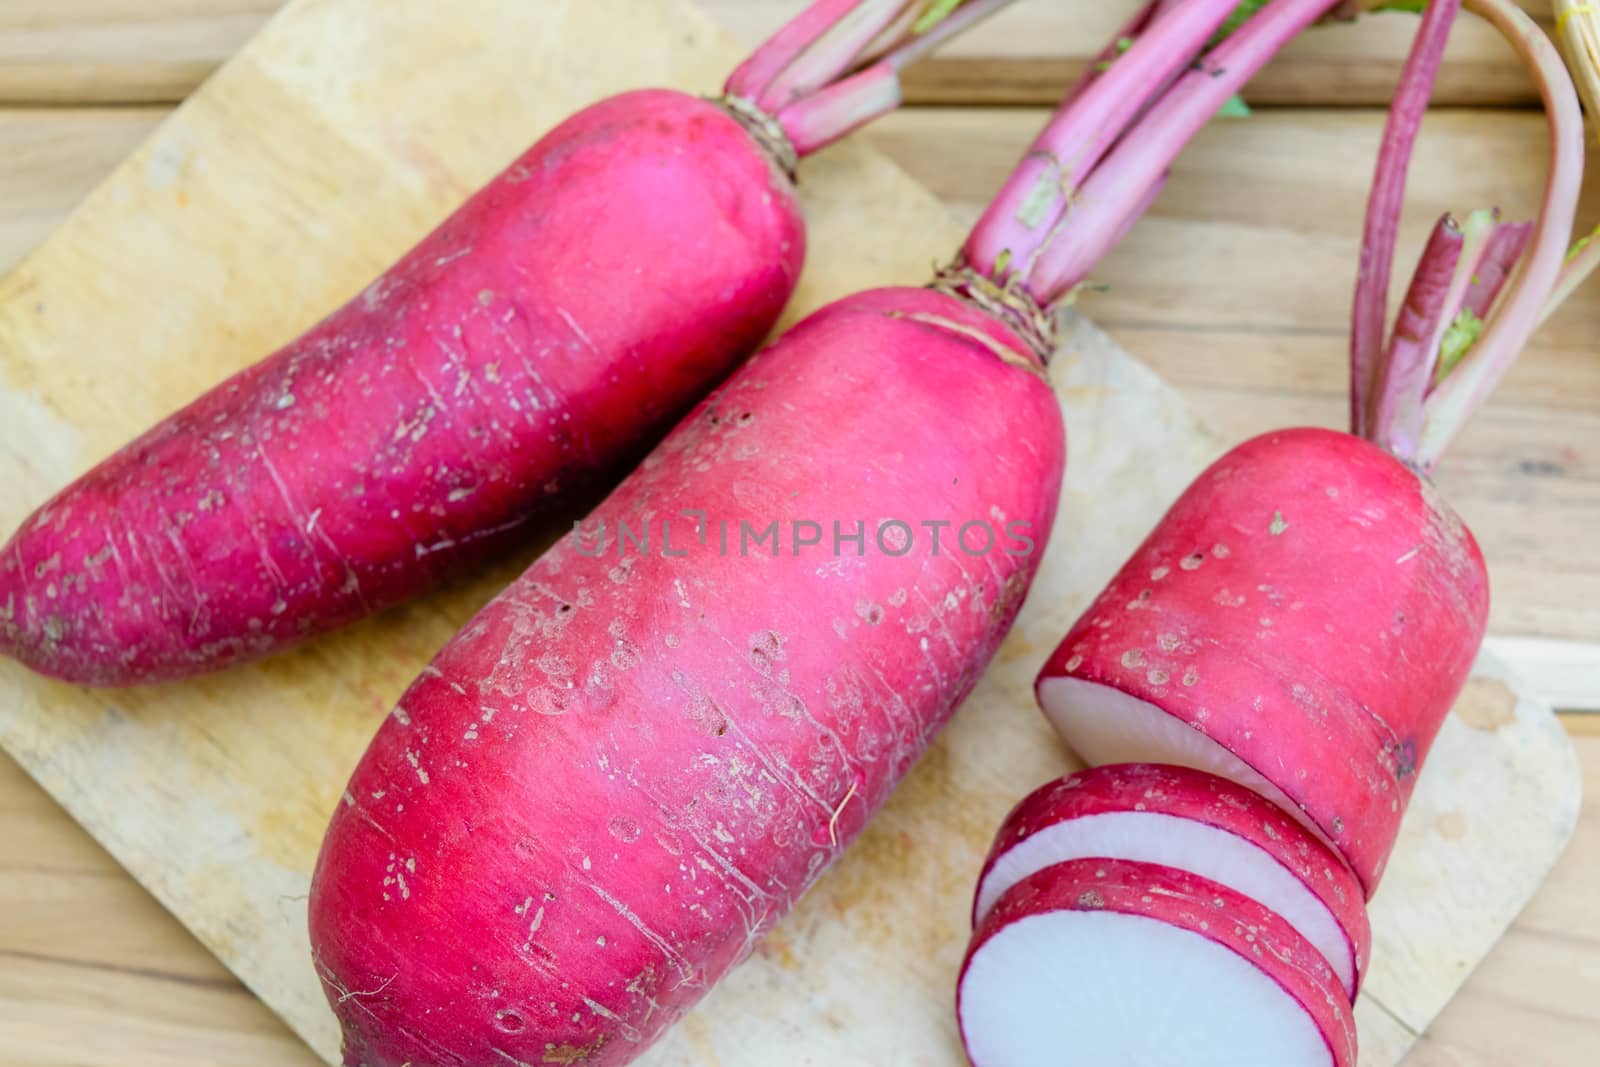 Red radish on wooden table by naramit